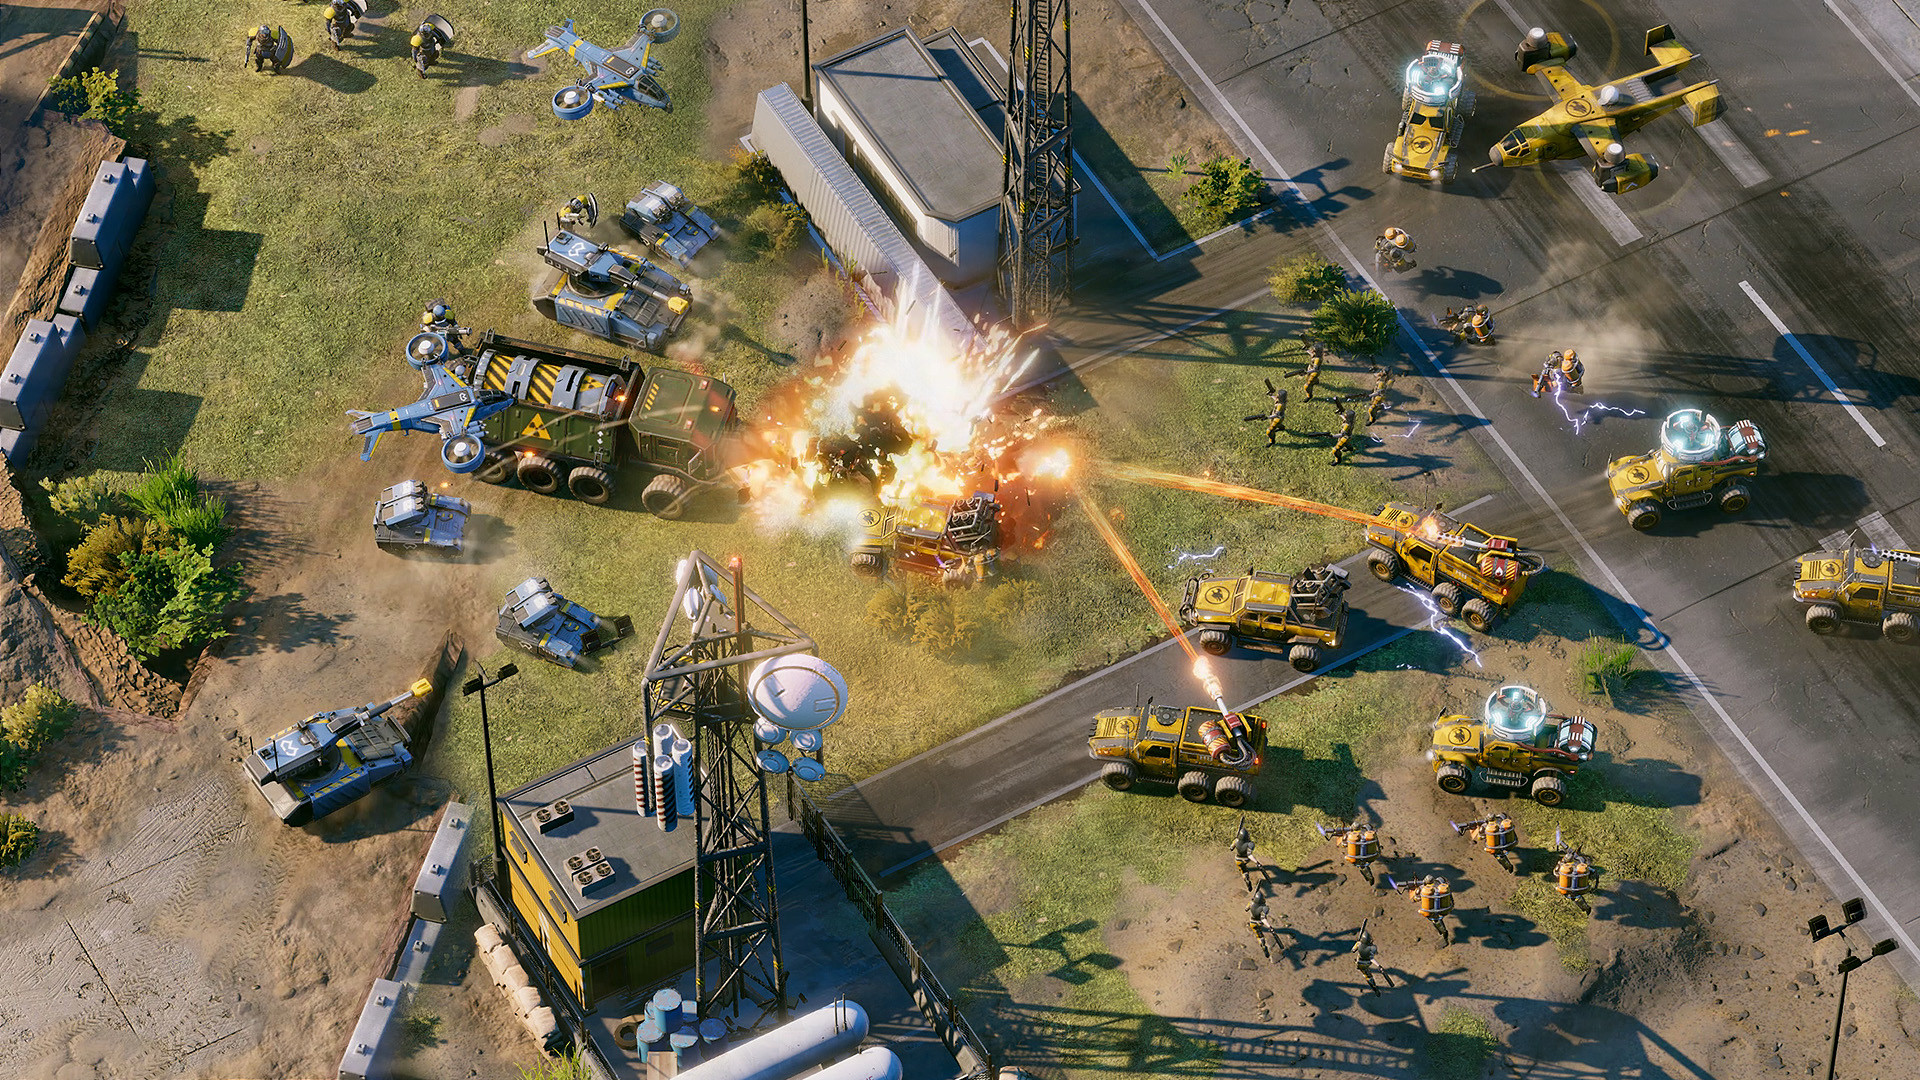 Crossfire: Legion brings back the RTS genre while offering something for newcomers too